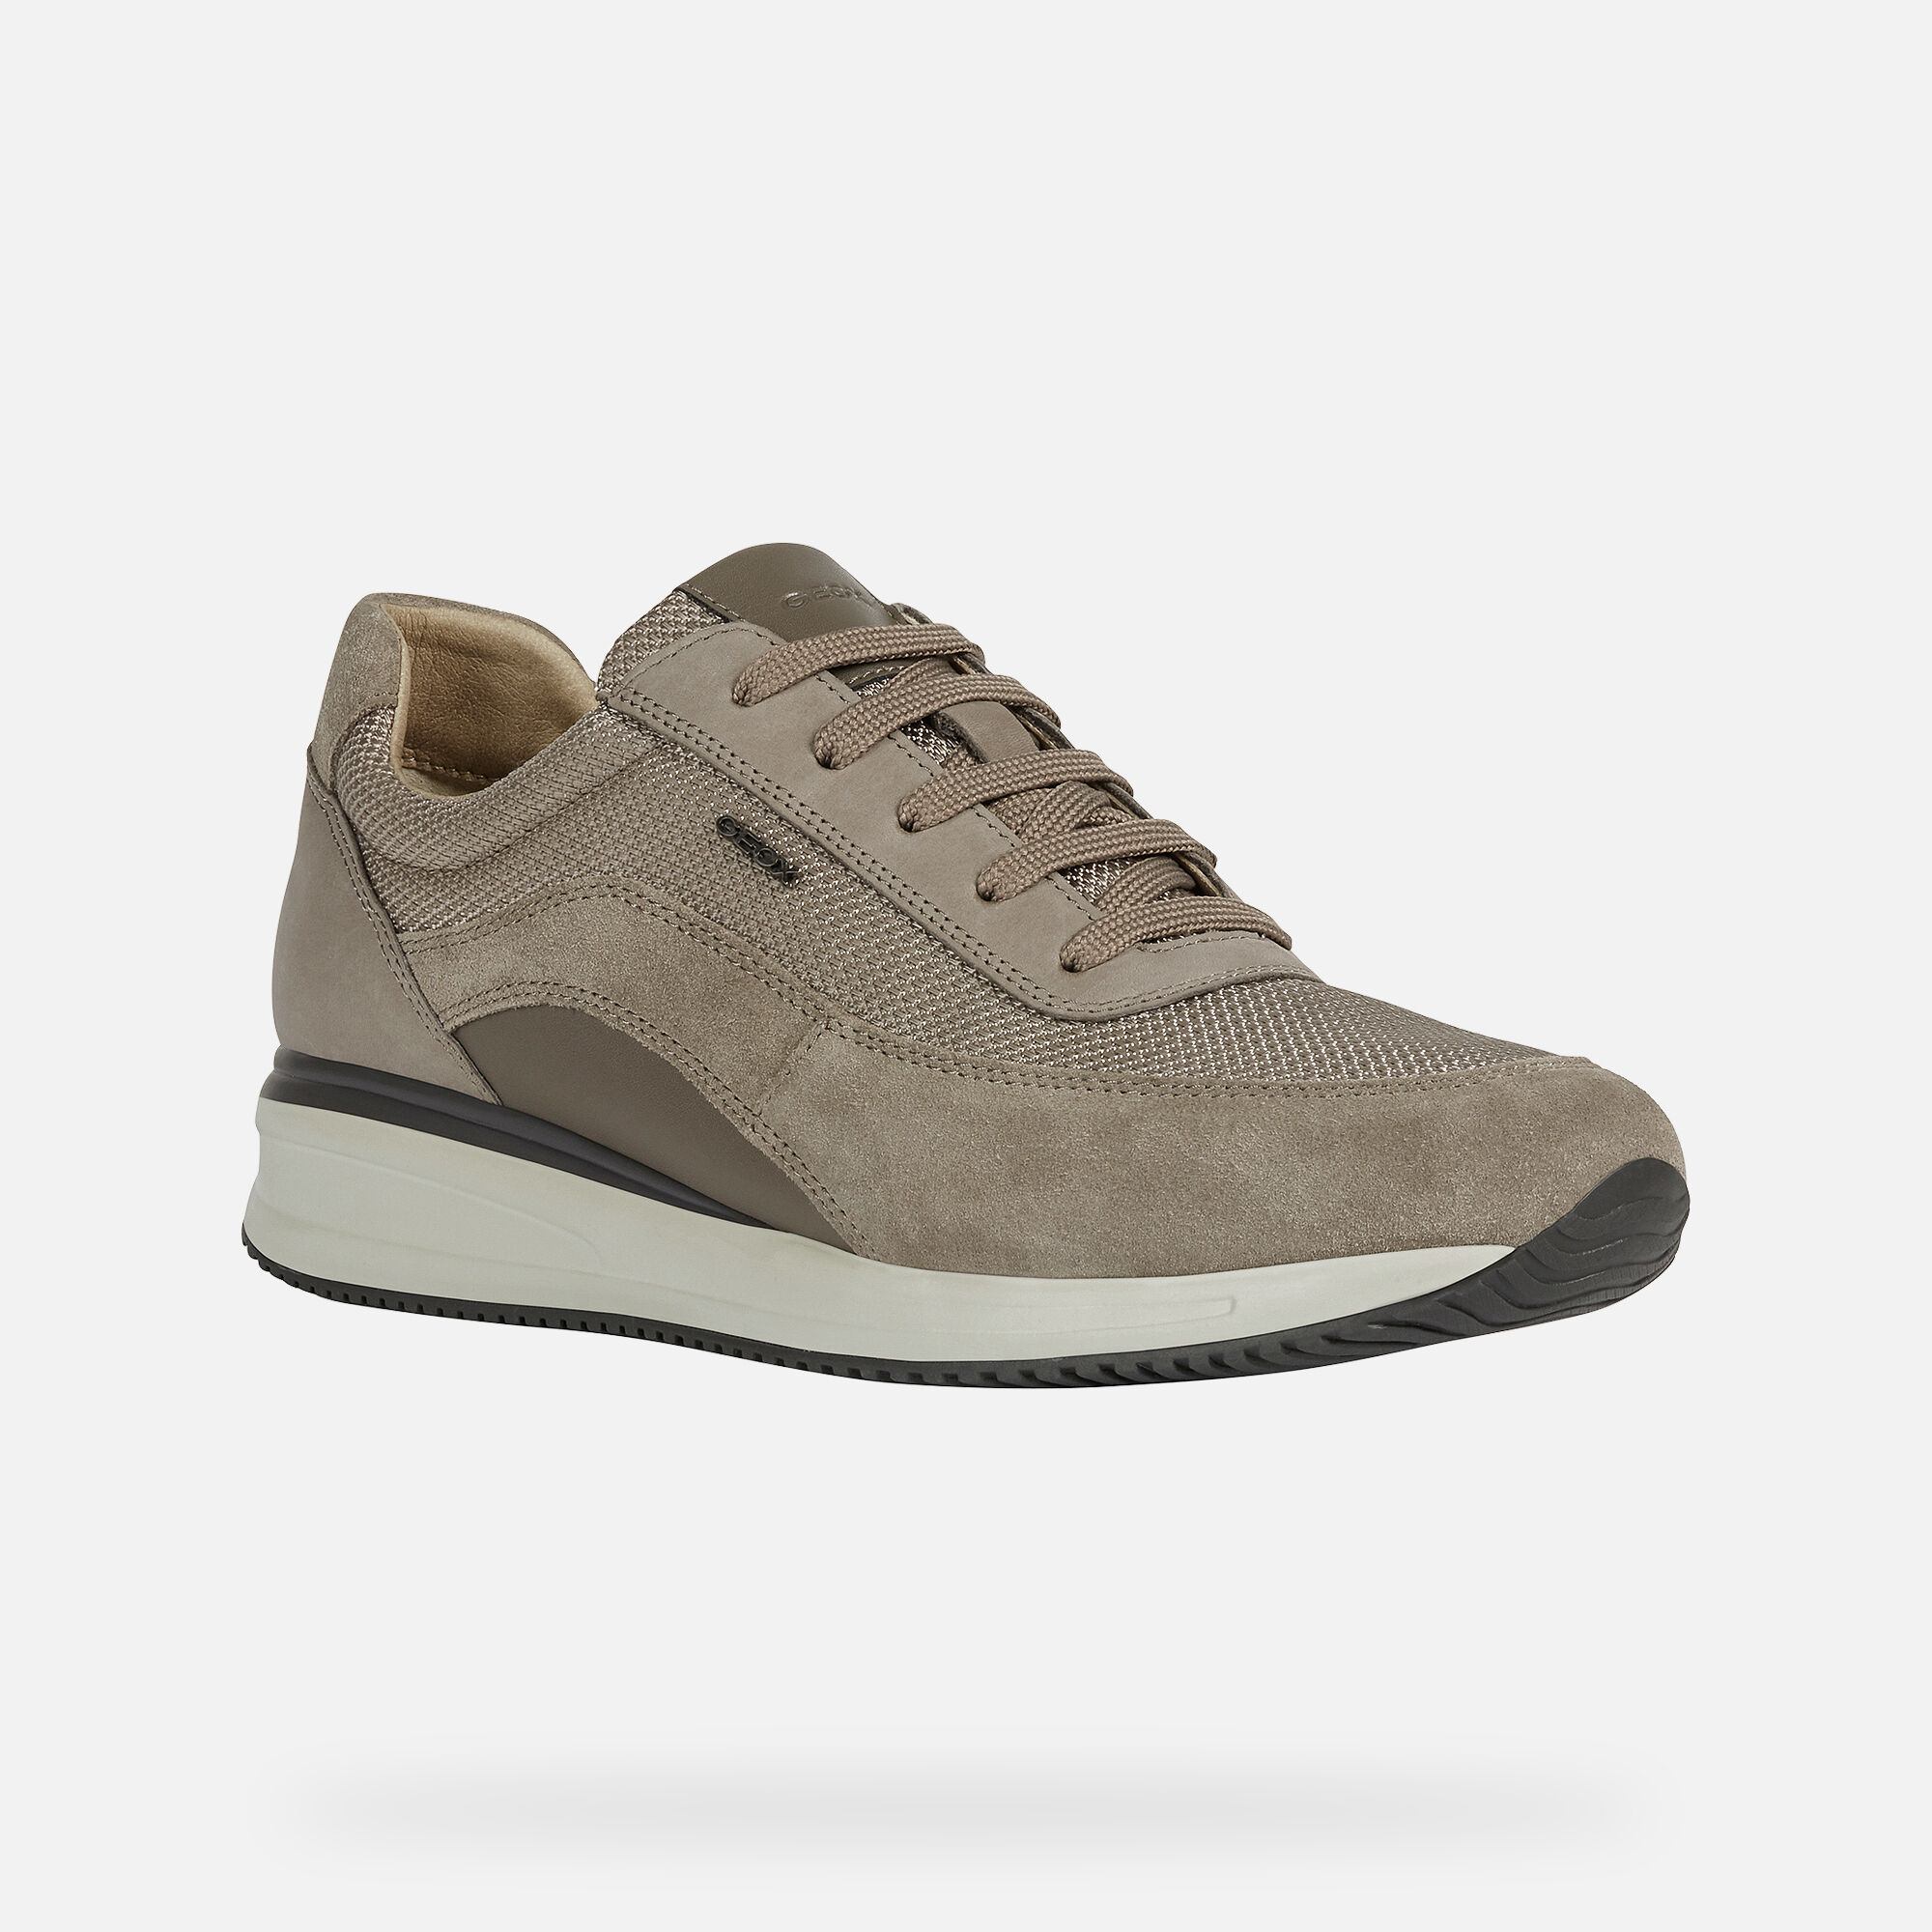 Geox DENNIE Man: Taupe Sneakers | Geox ® Official Store